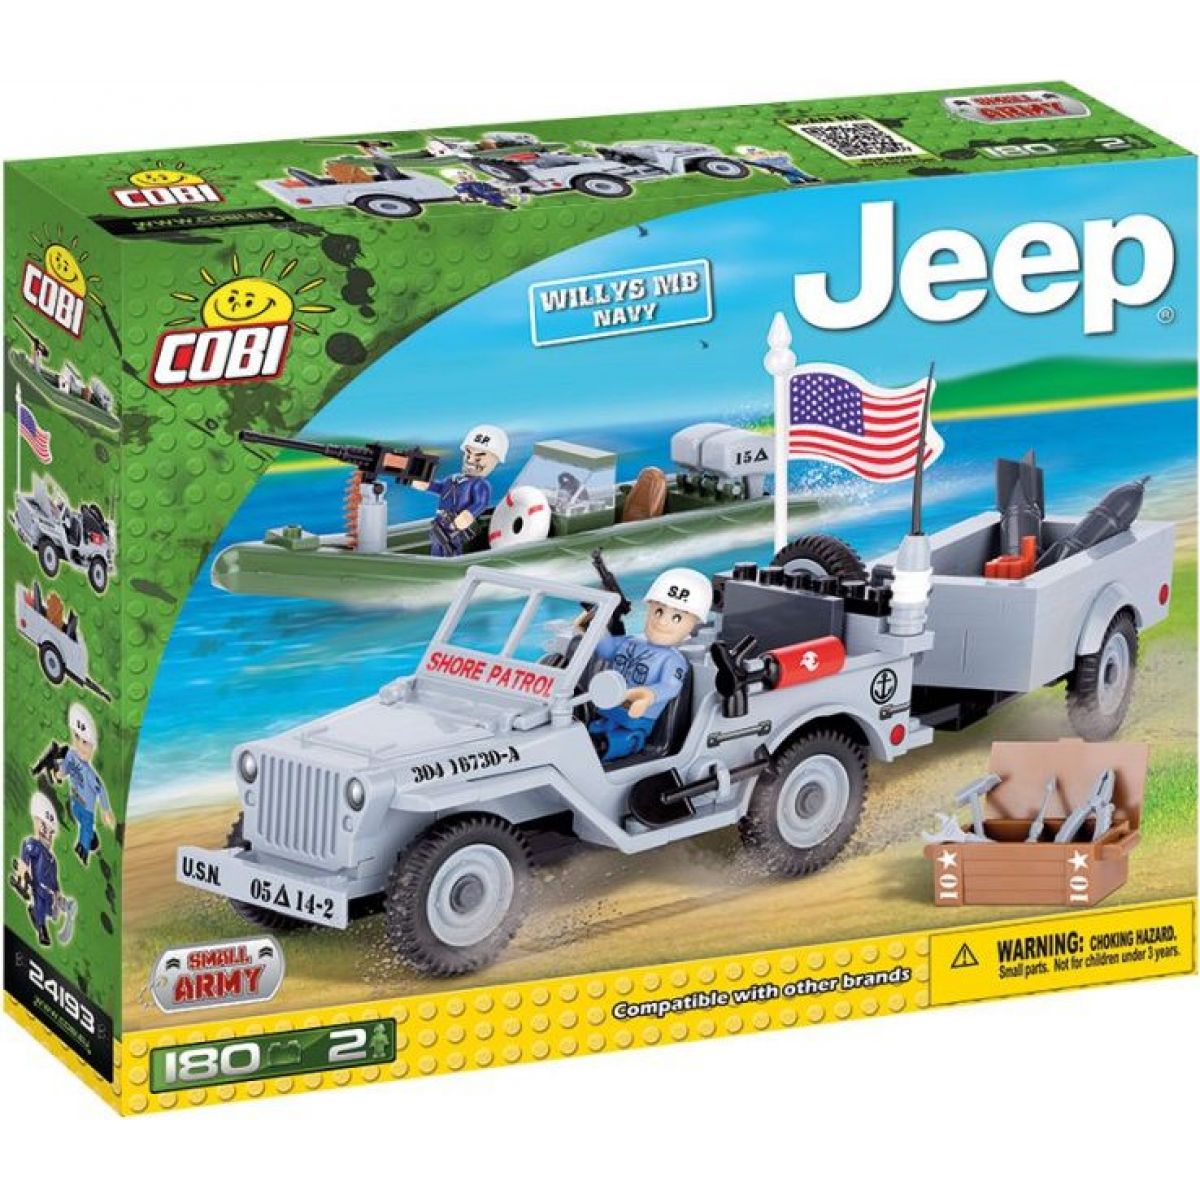 COBI 24193 Small Army JEEP Willys MB US Navy